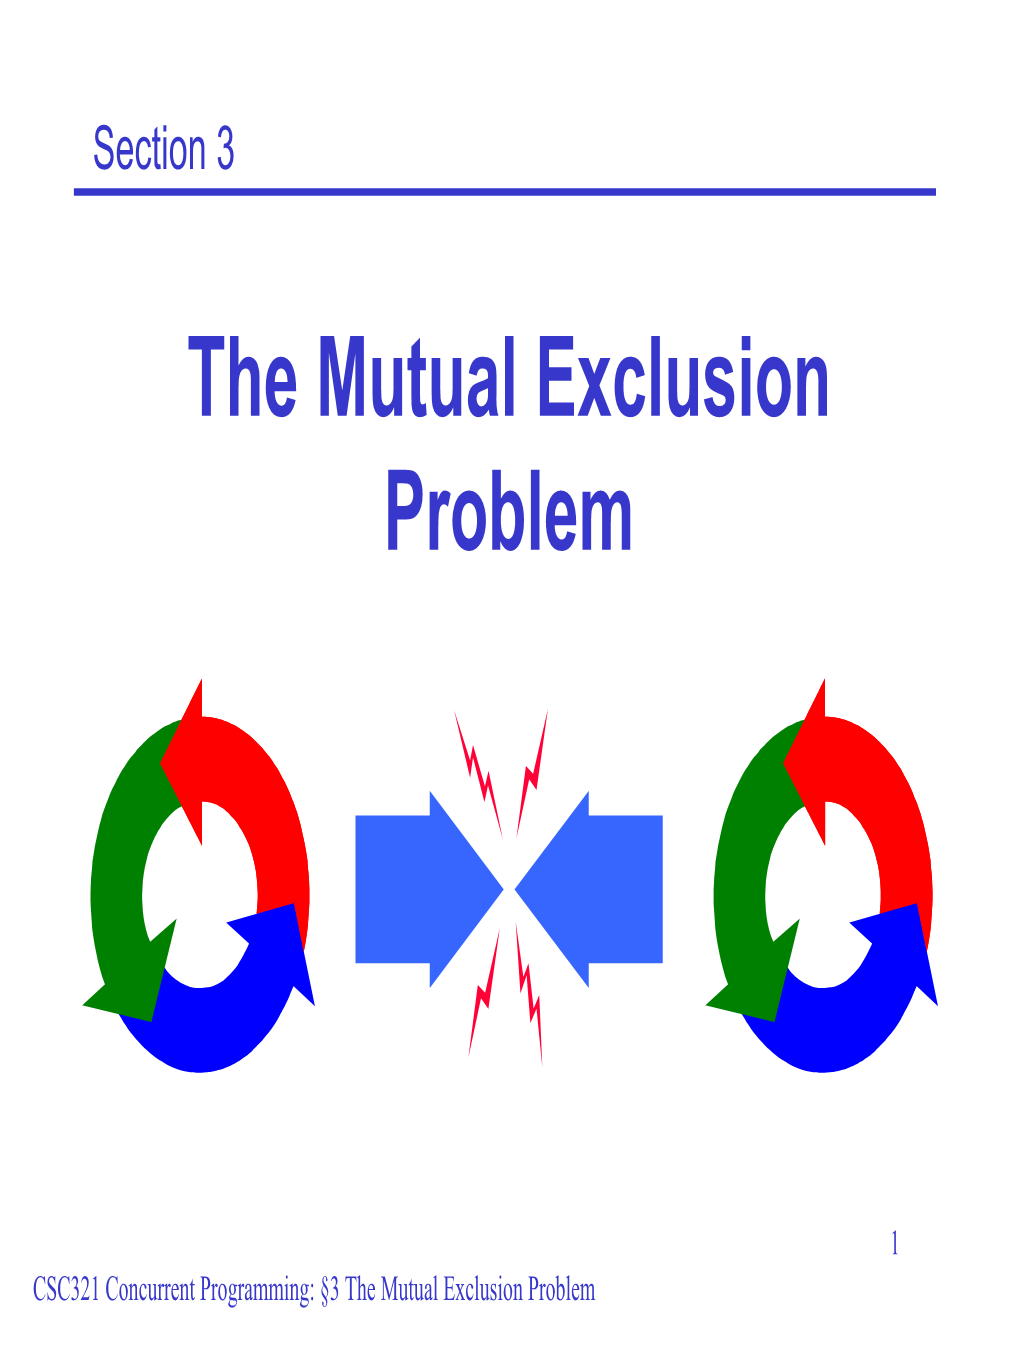 The Mutual Exclusion Problem